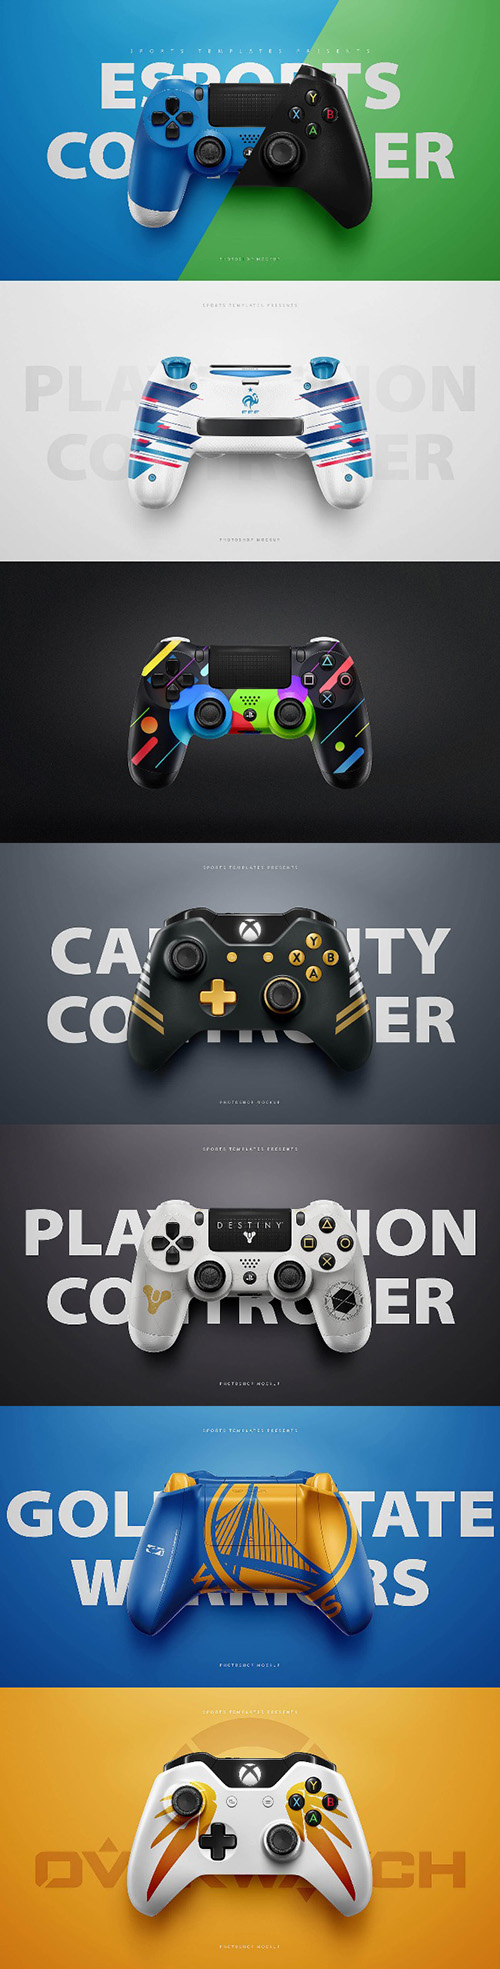 Playstation 4 & Xbox One Controllers Photoshop Psd Templates PSD